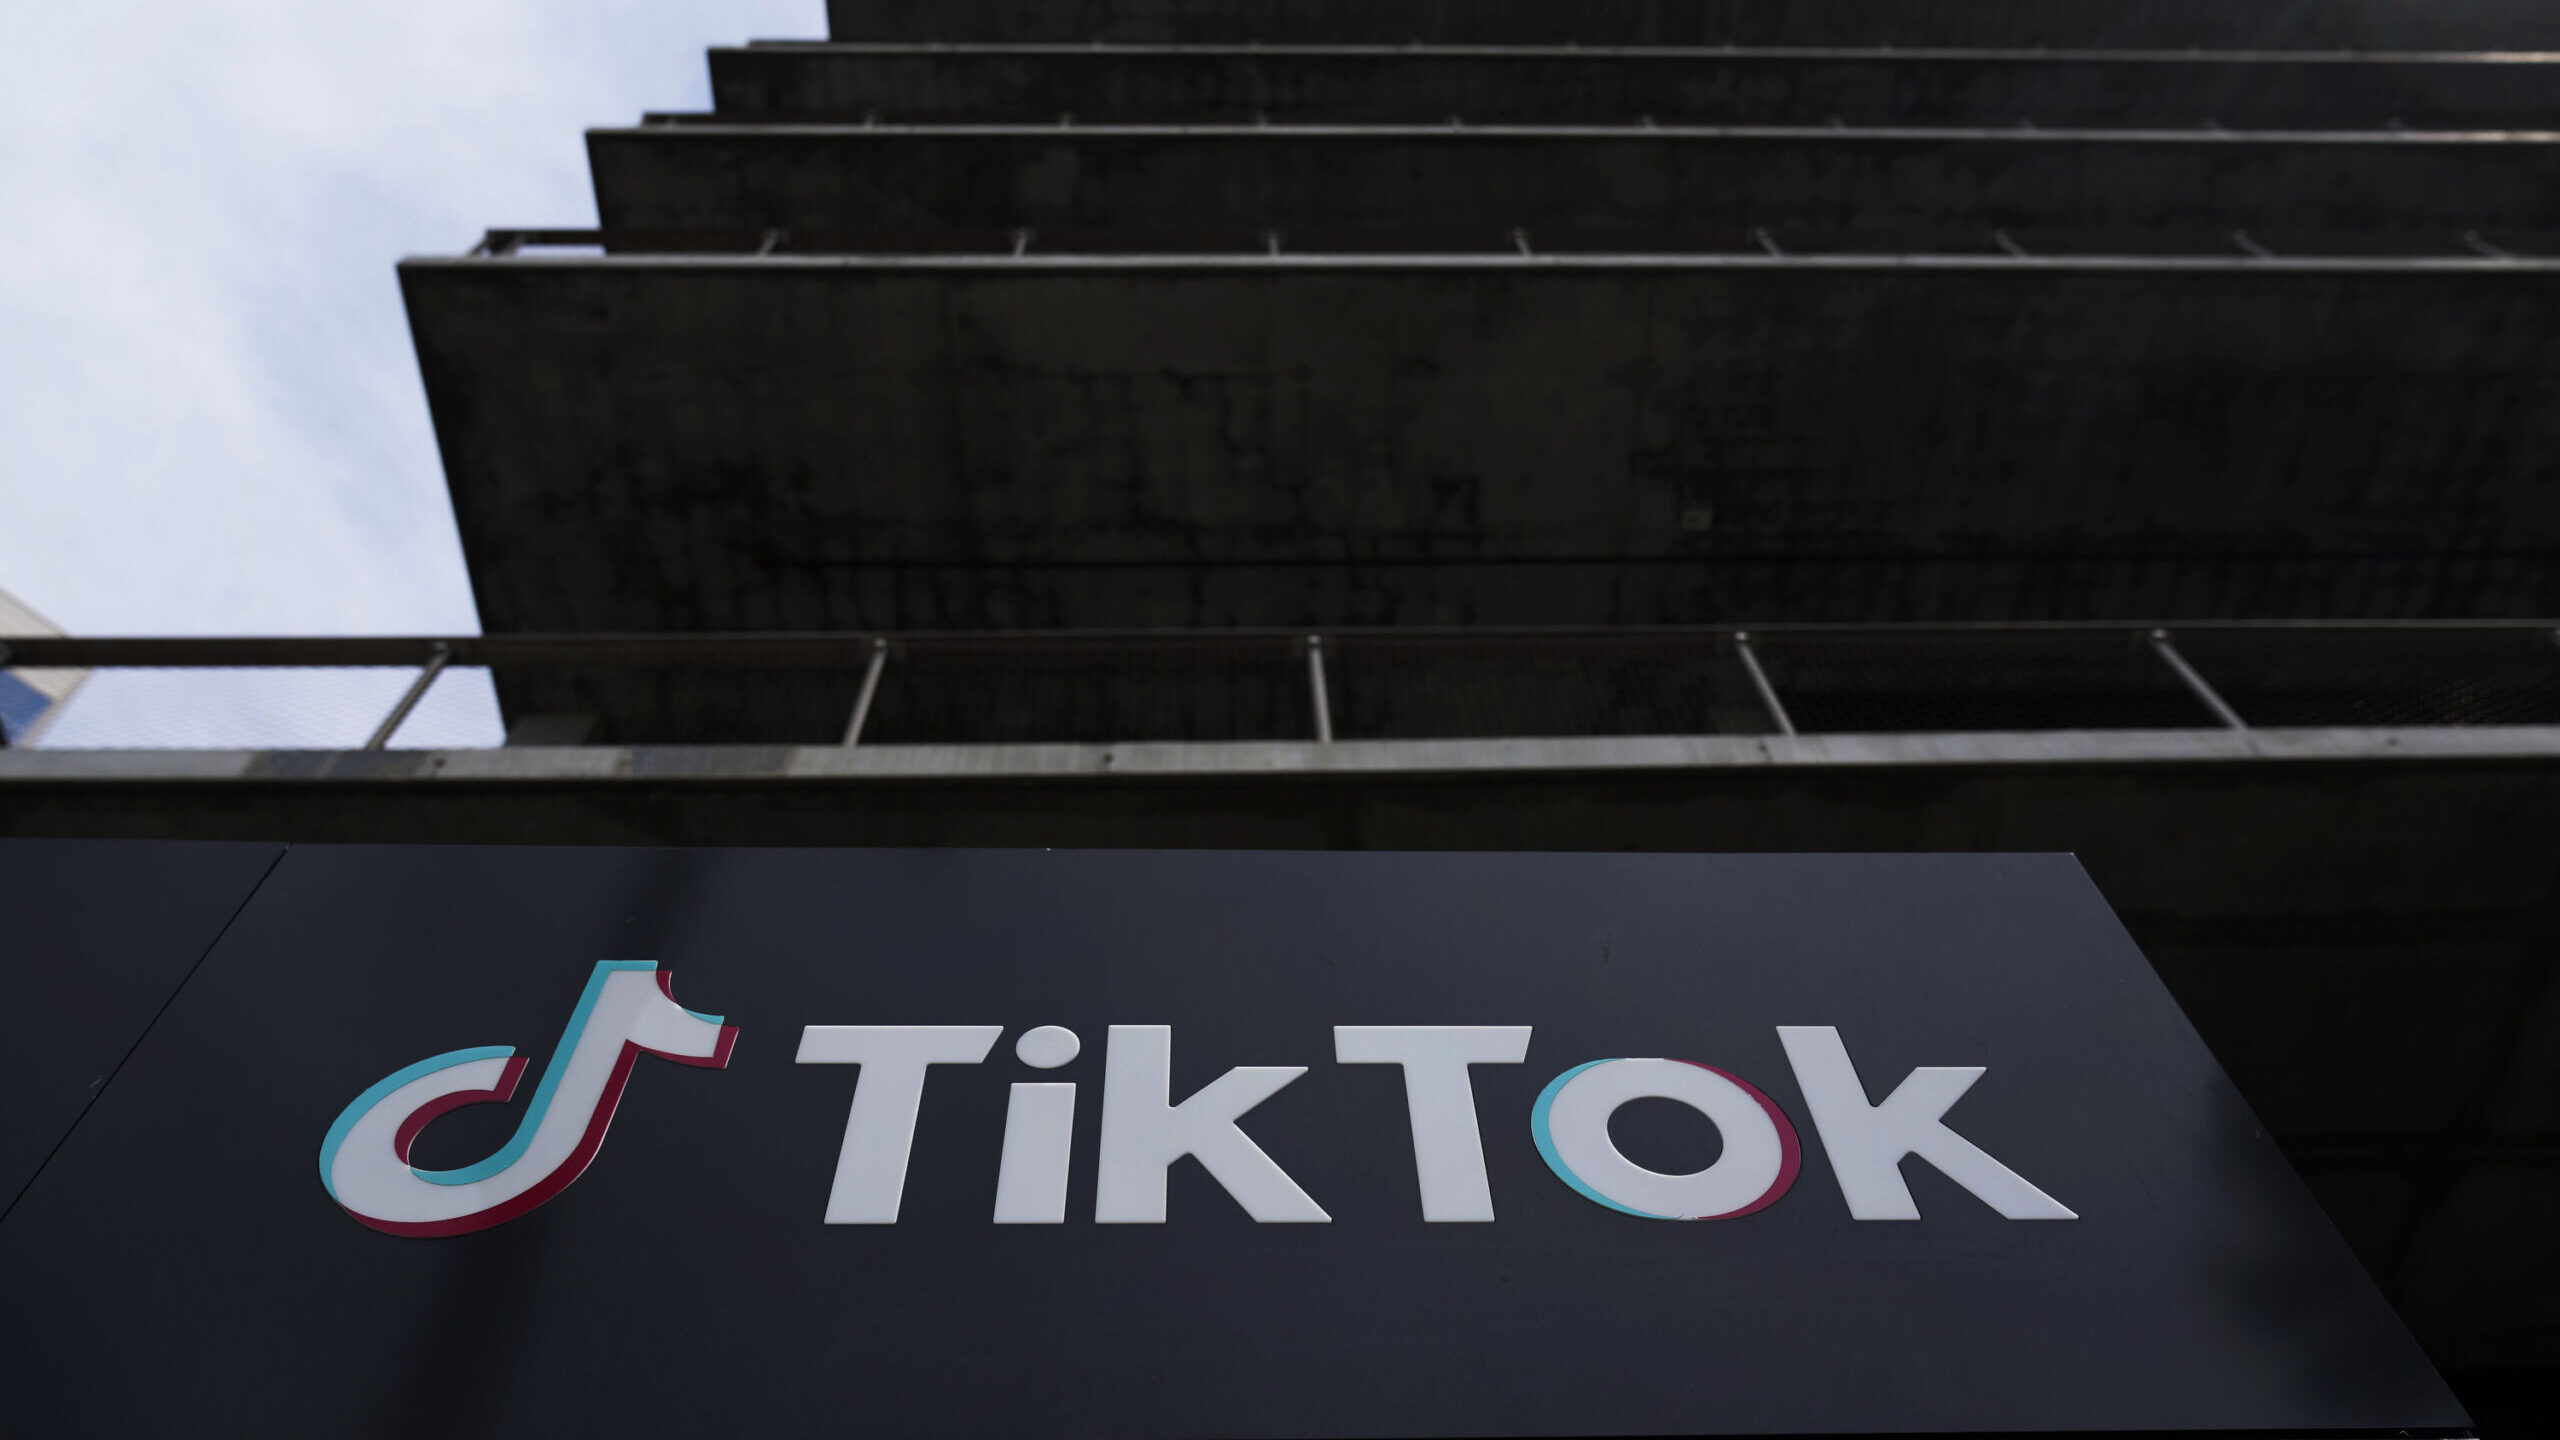 TikTok's CEO plans to tell Congress that the video-sharing app is committed to user safety, data pr...